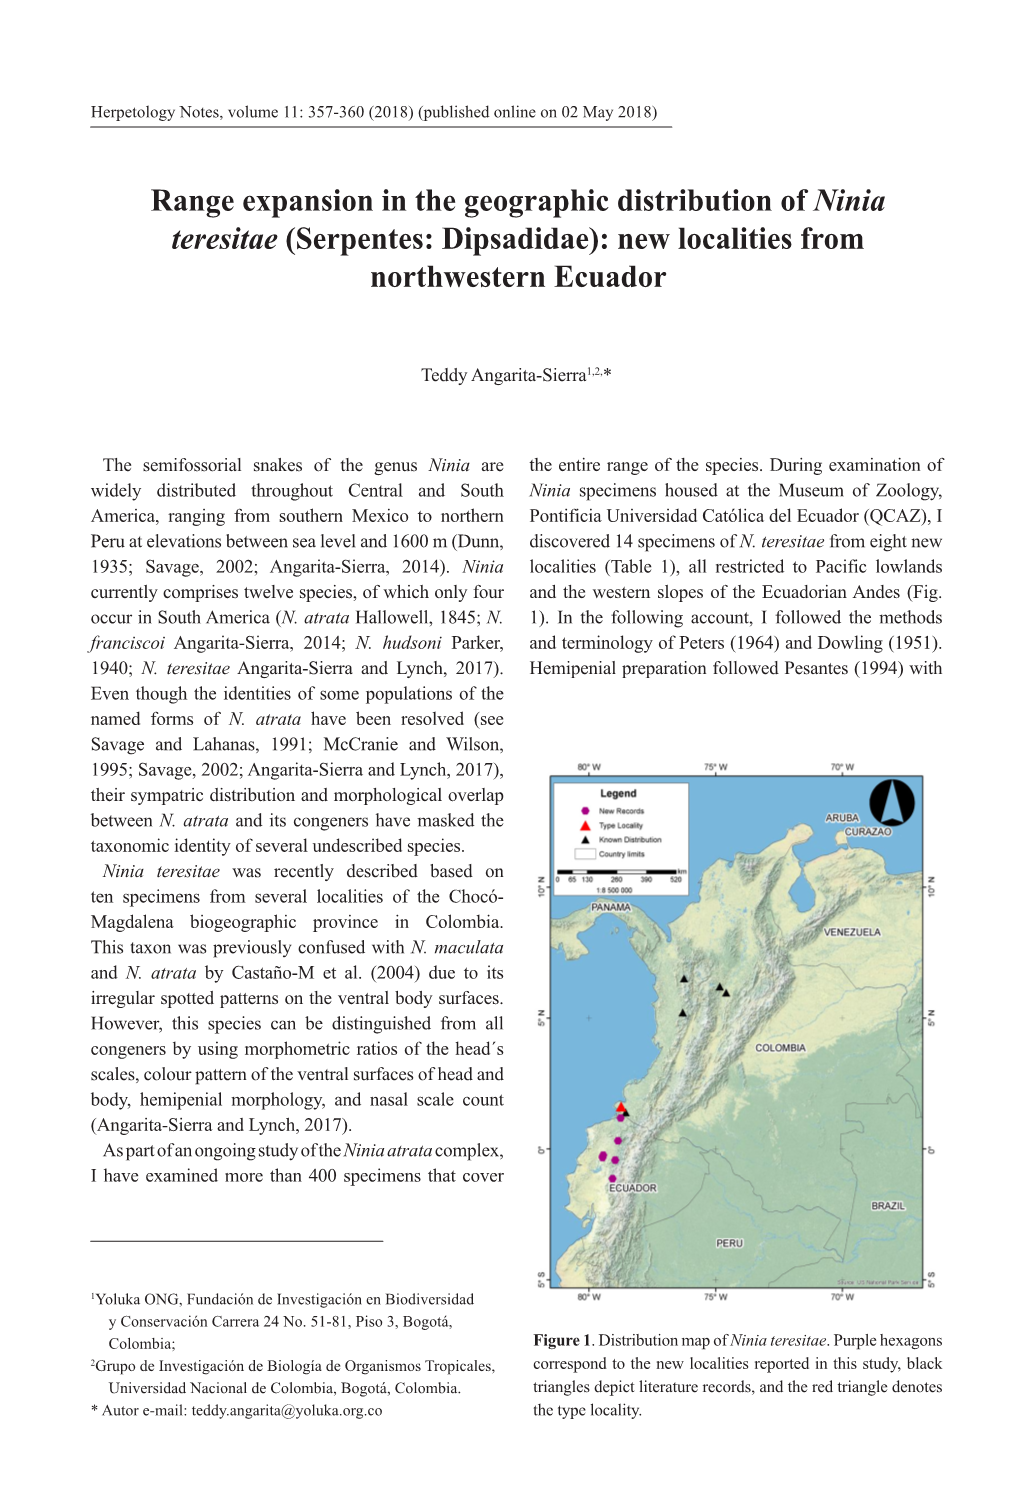 Range Expansion in the Geographic Distribution of Ninia Teresitae (Serpentes: Dipsadidae): New Localities from Northwestern Ecuador